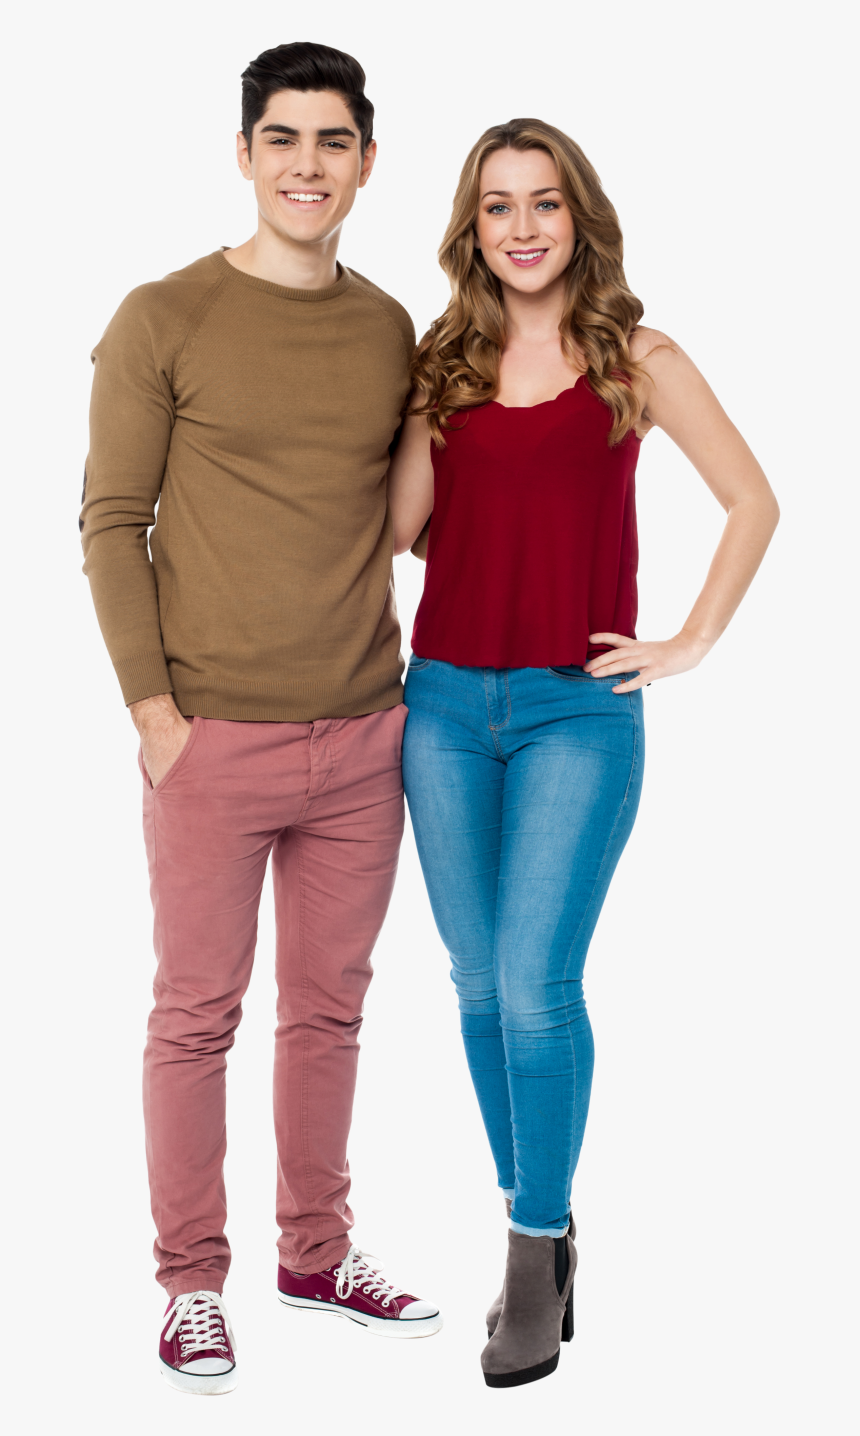 Couple Png Image - Couple Dresses Png, Transparent Png, Free Download